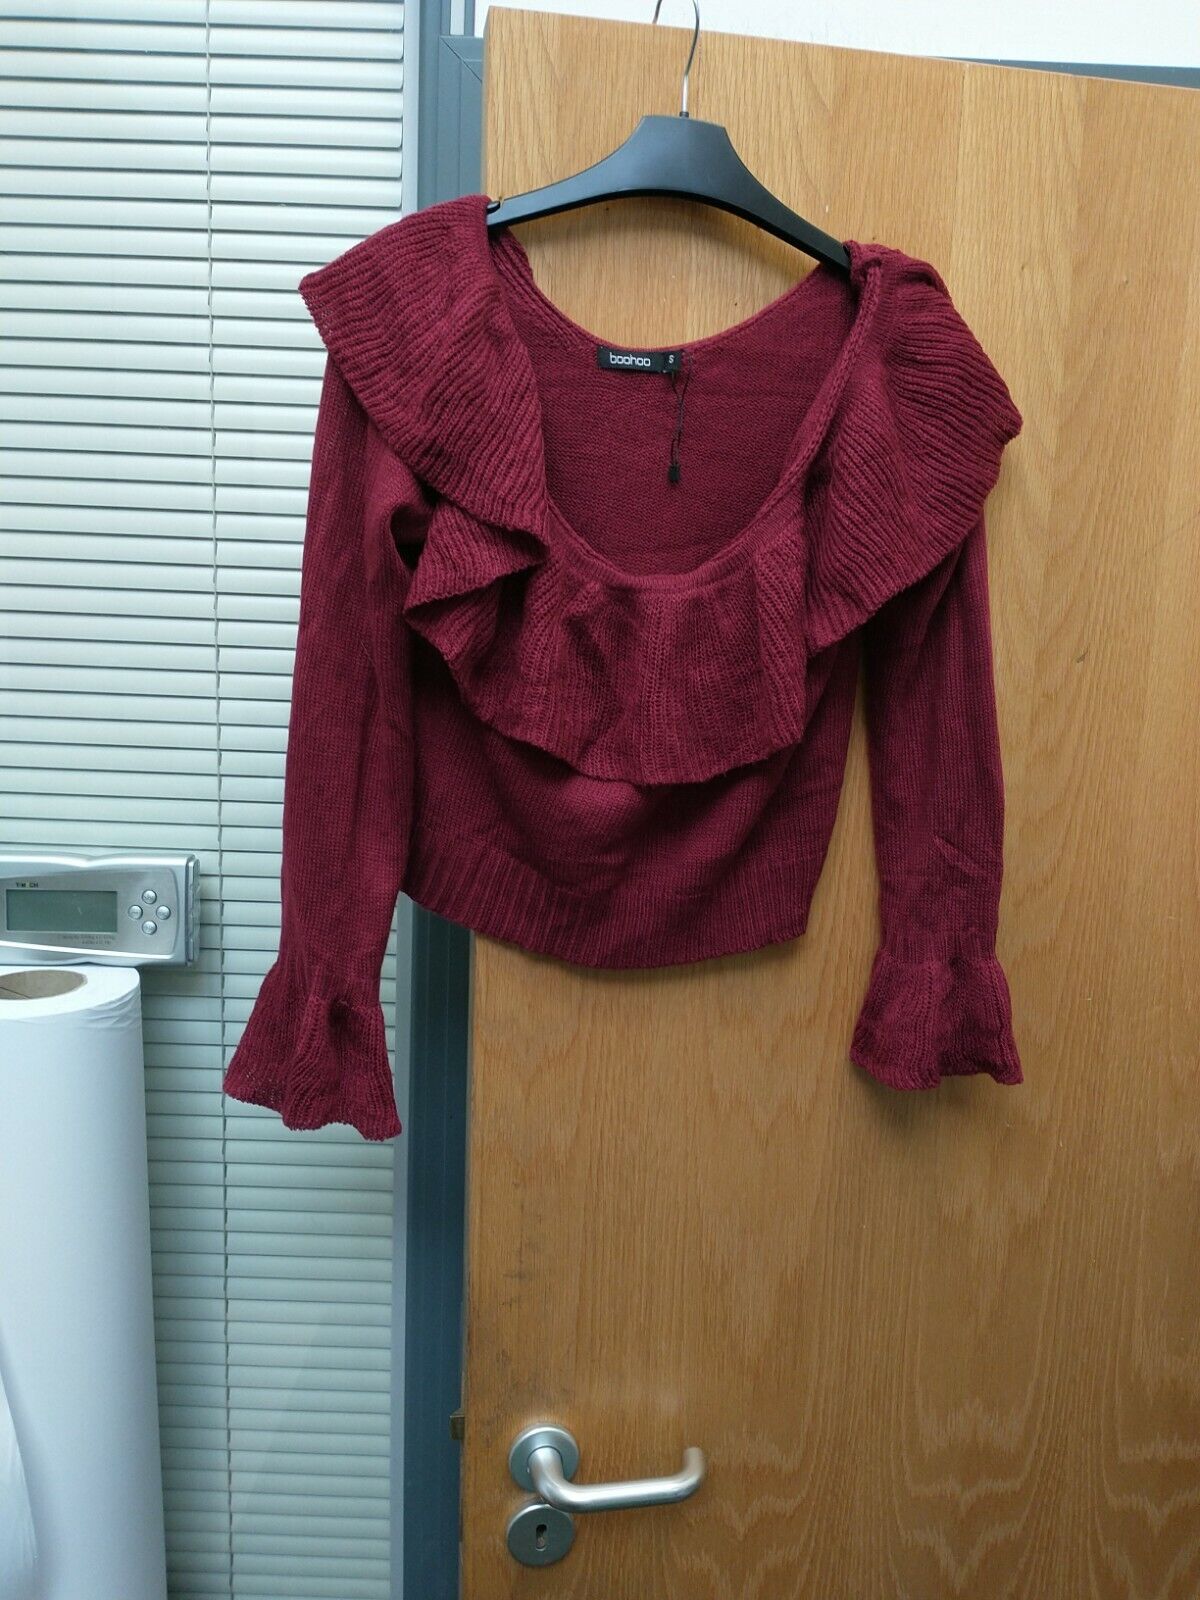 Boohoo Ladies Size Small Plum Jumper. New But No Packaging..Ref Xbox 1